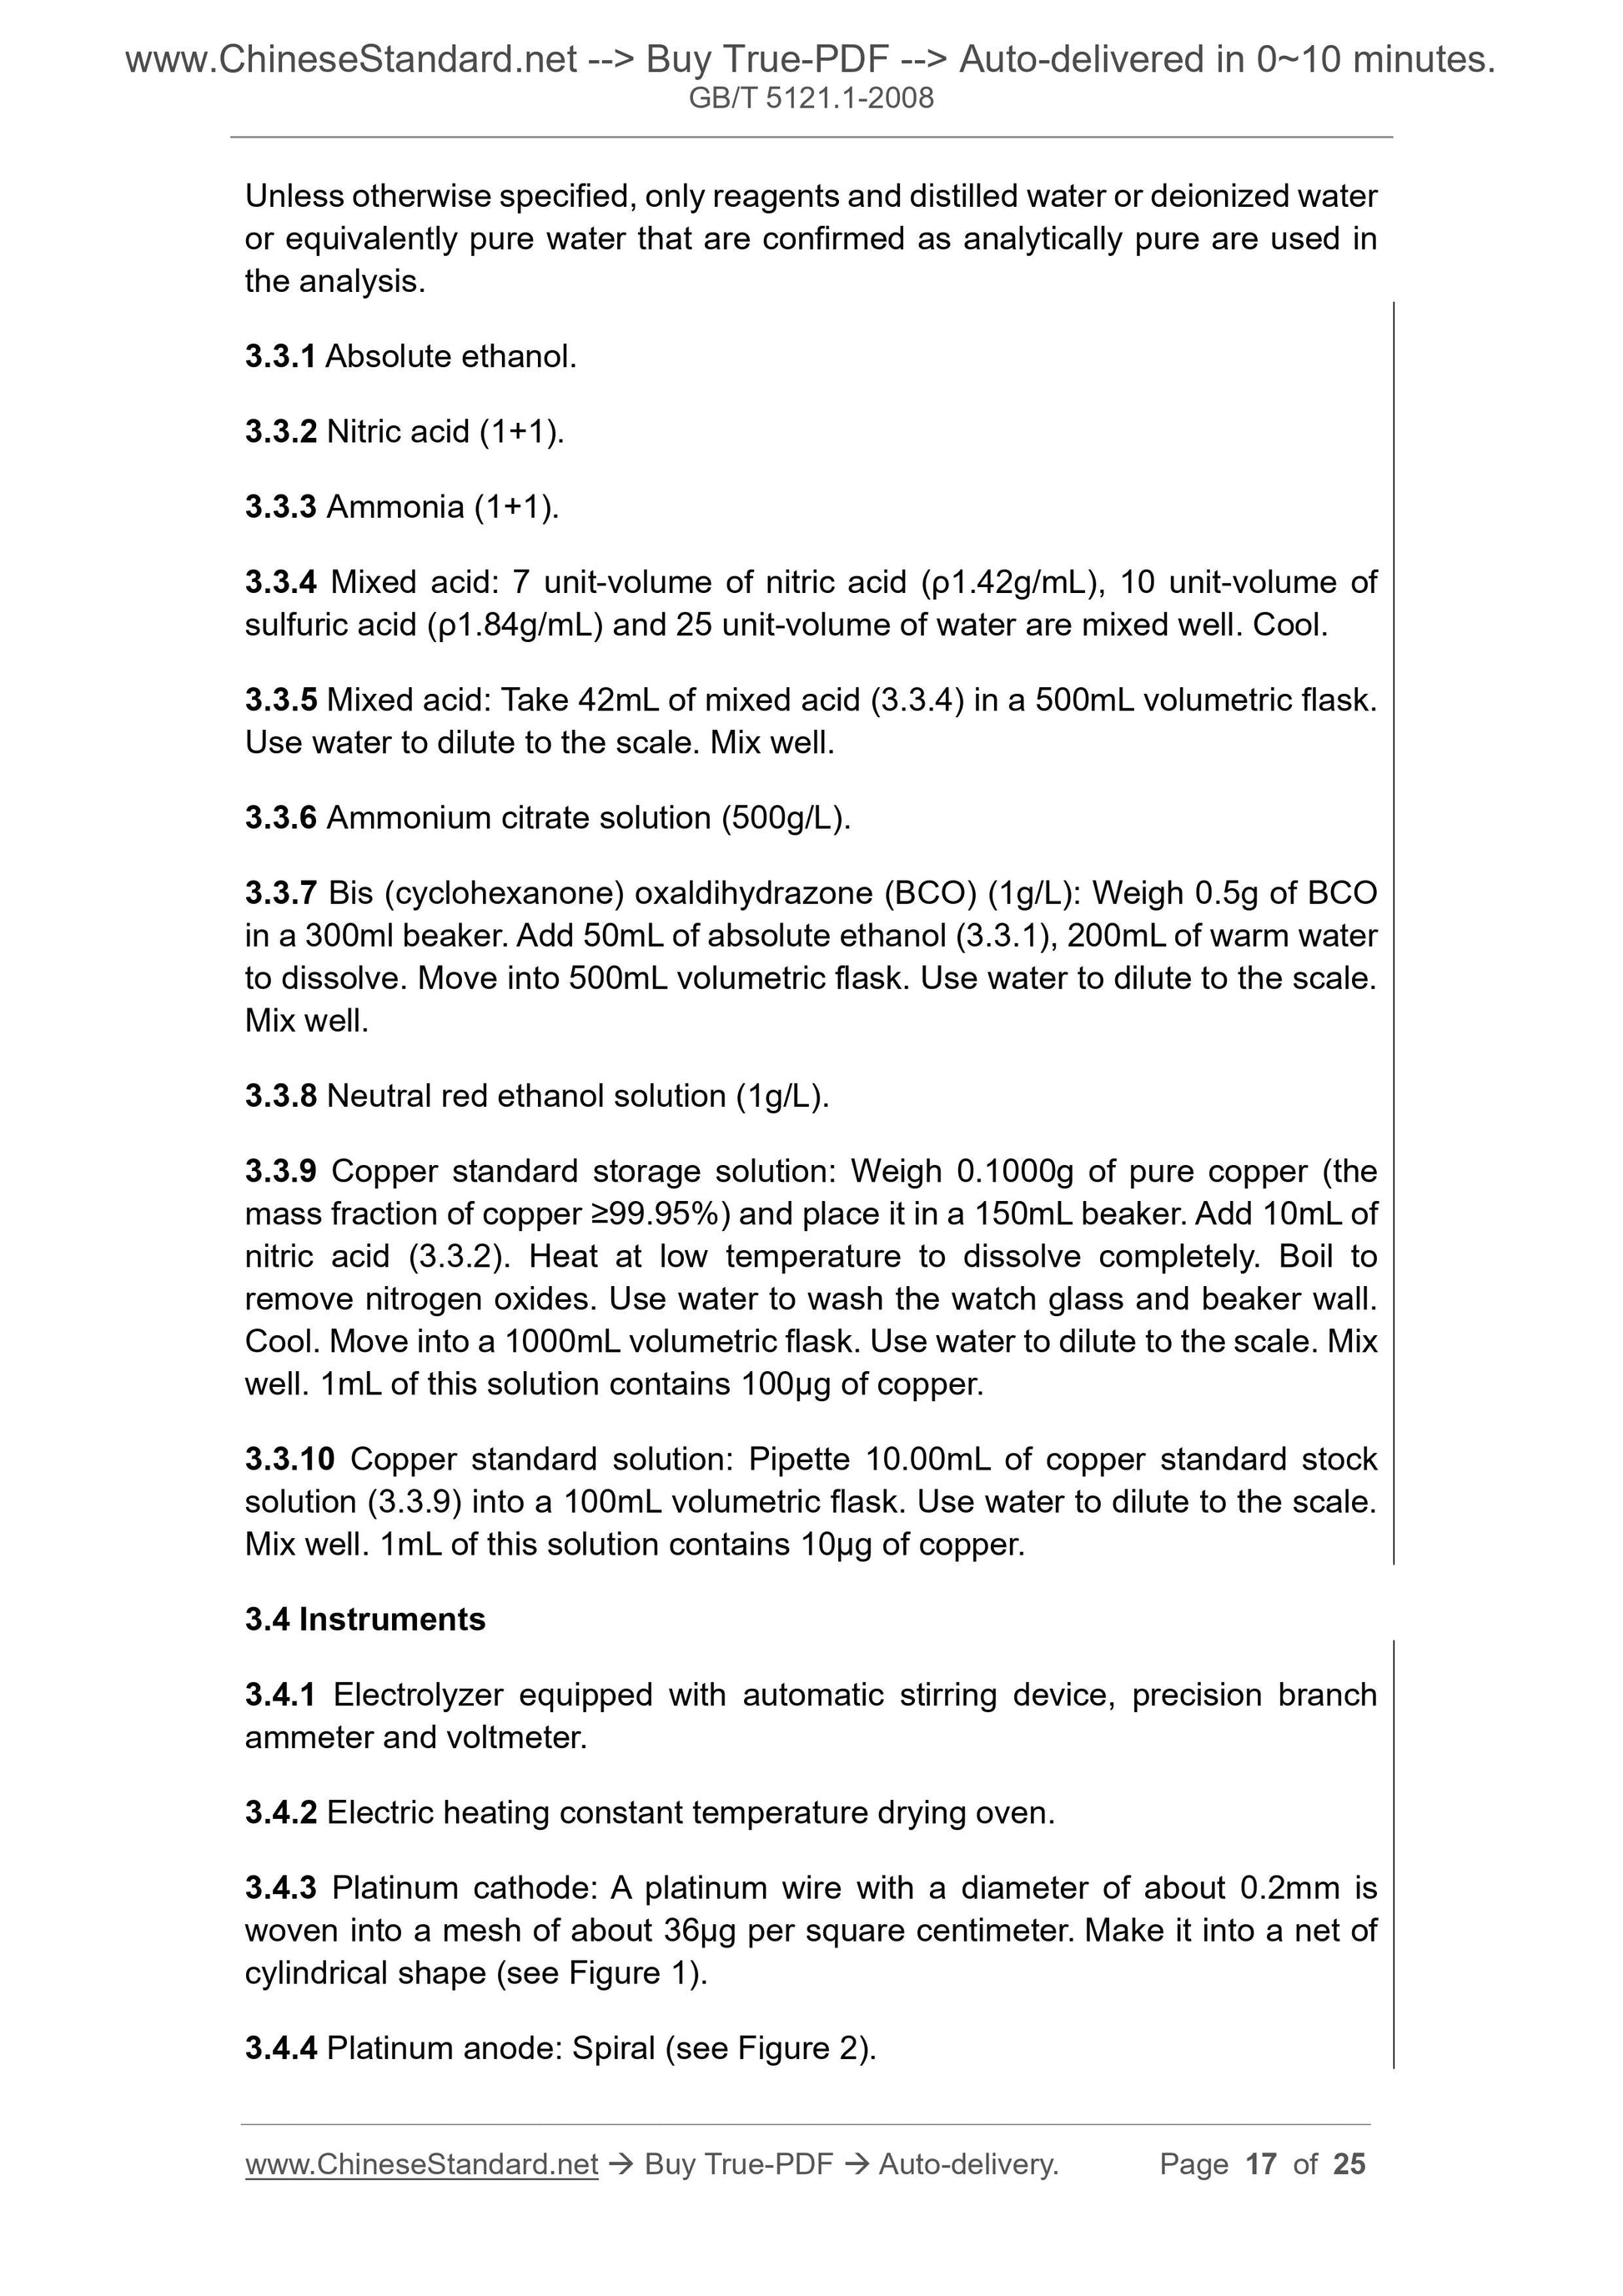 GB/T 5121.1-2008 Page 7